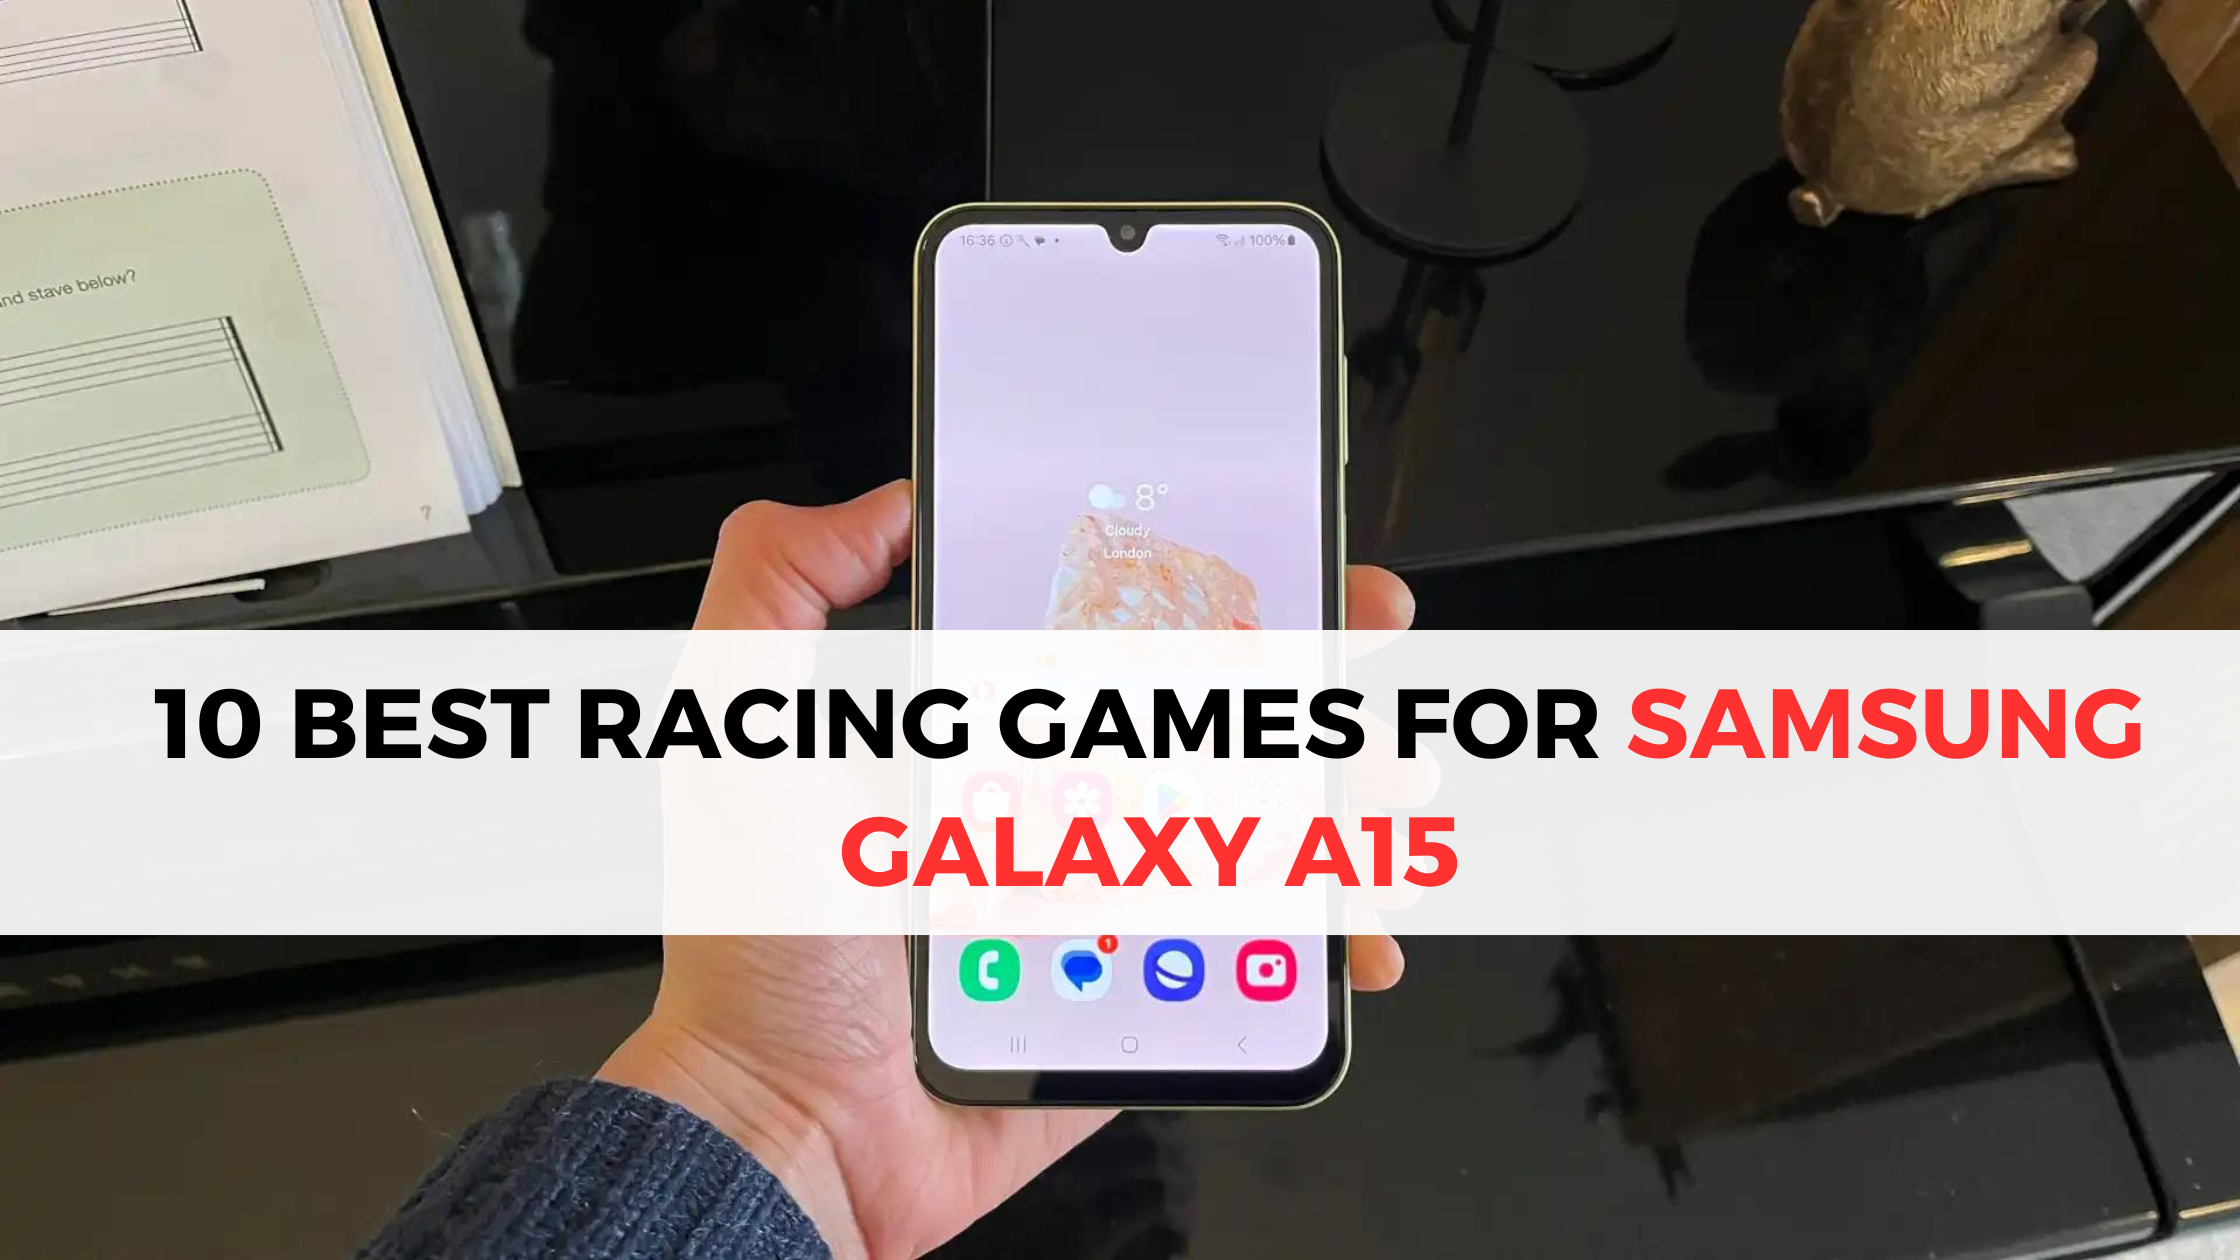 10 best racing games for Samsung Galaxy A15